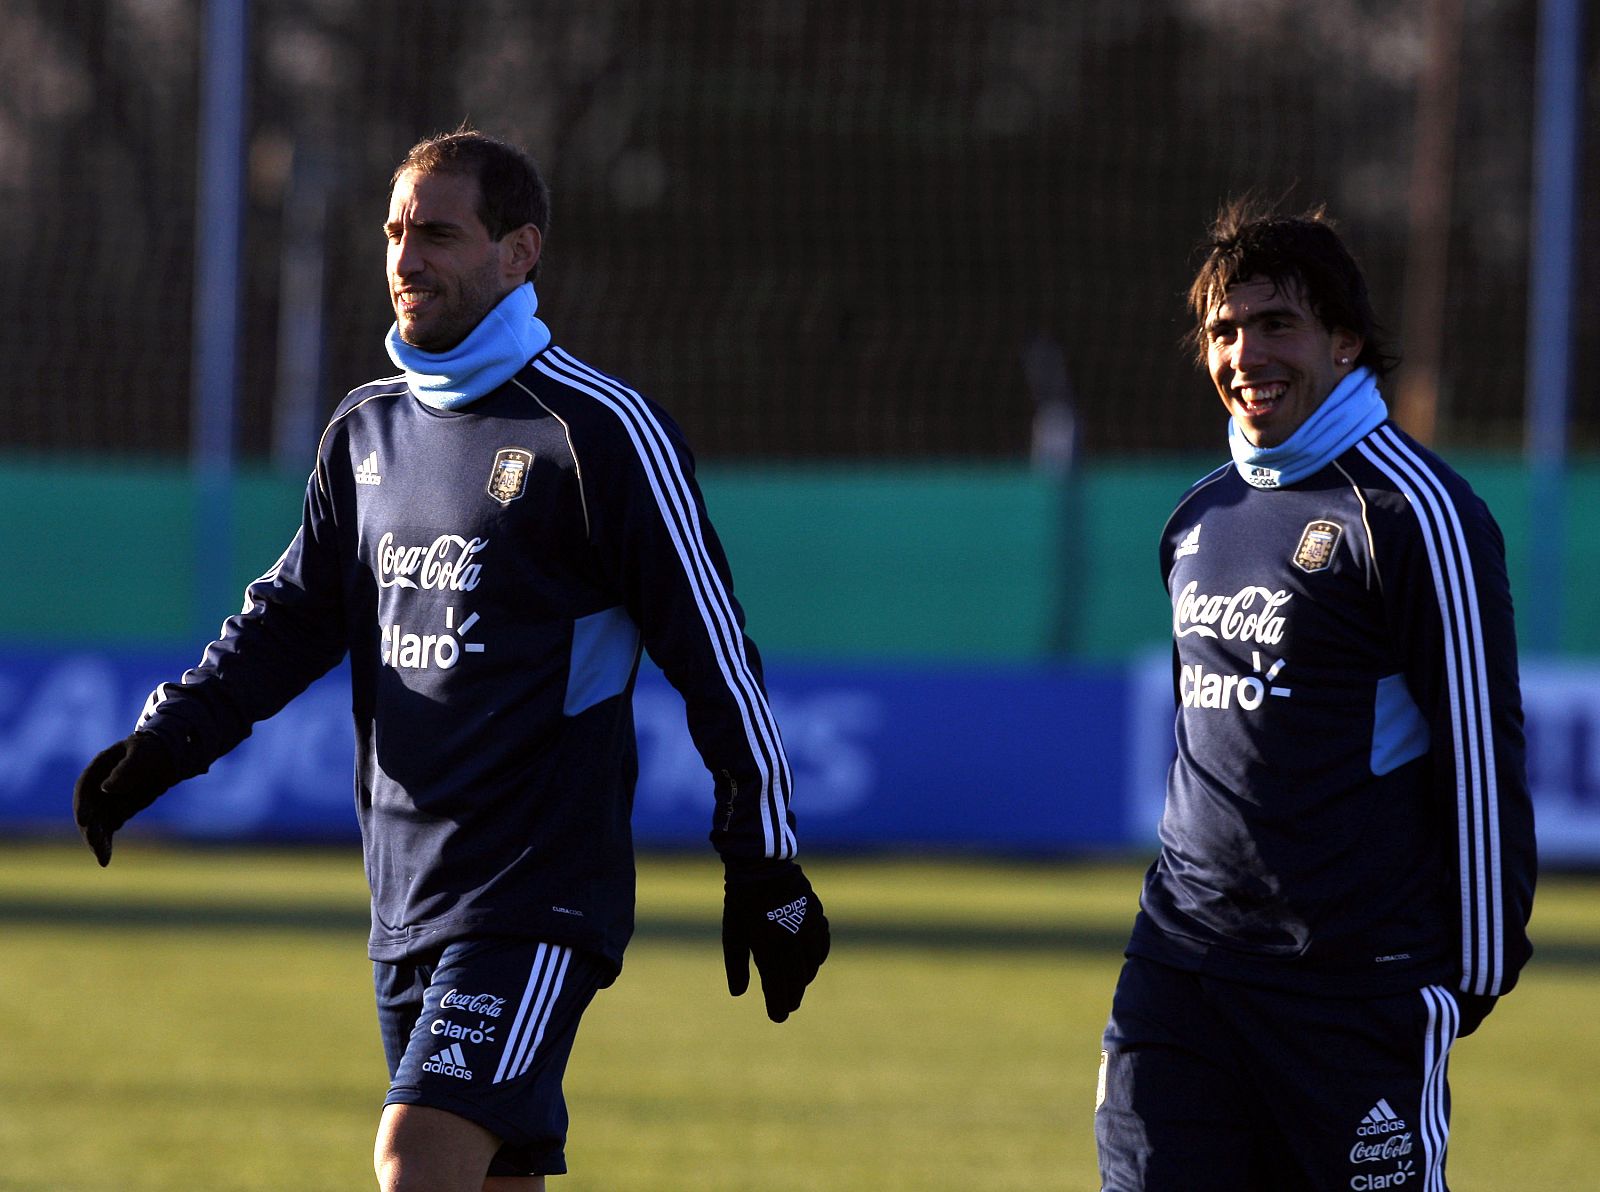 Argentina's national soccer team players Carlos Tevez and Pablo Zabaleta attends a training session in Buenos Aires